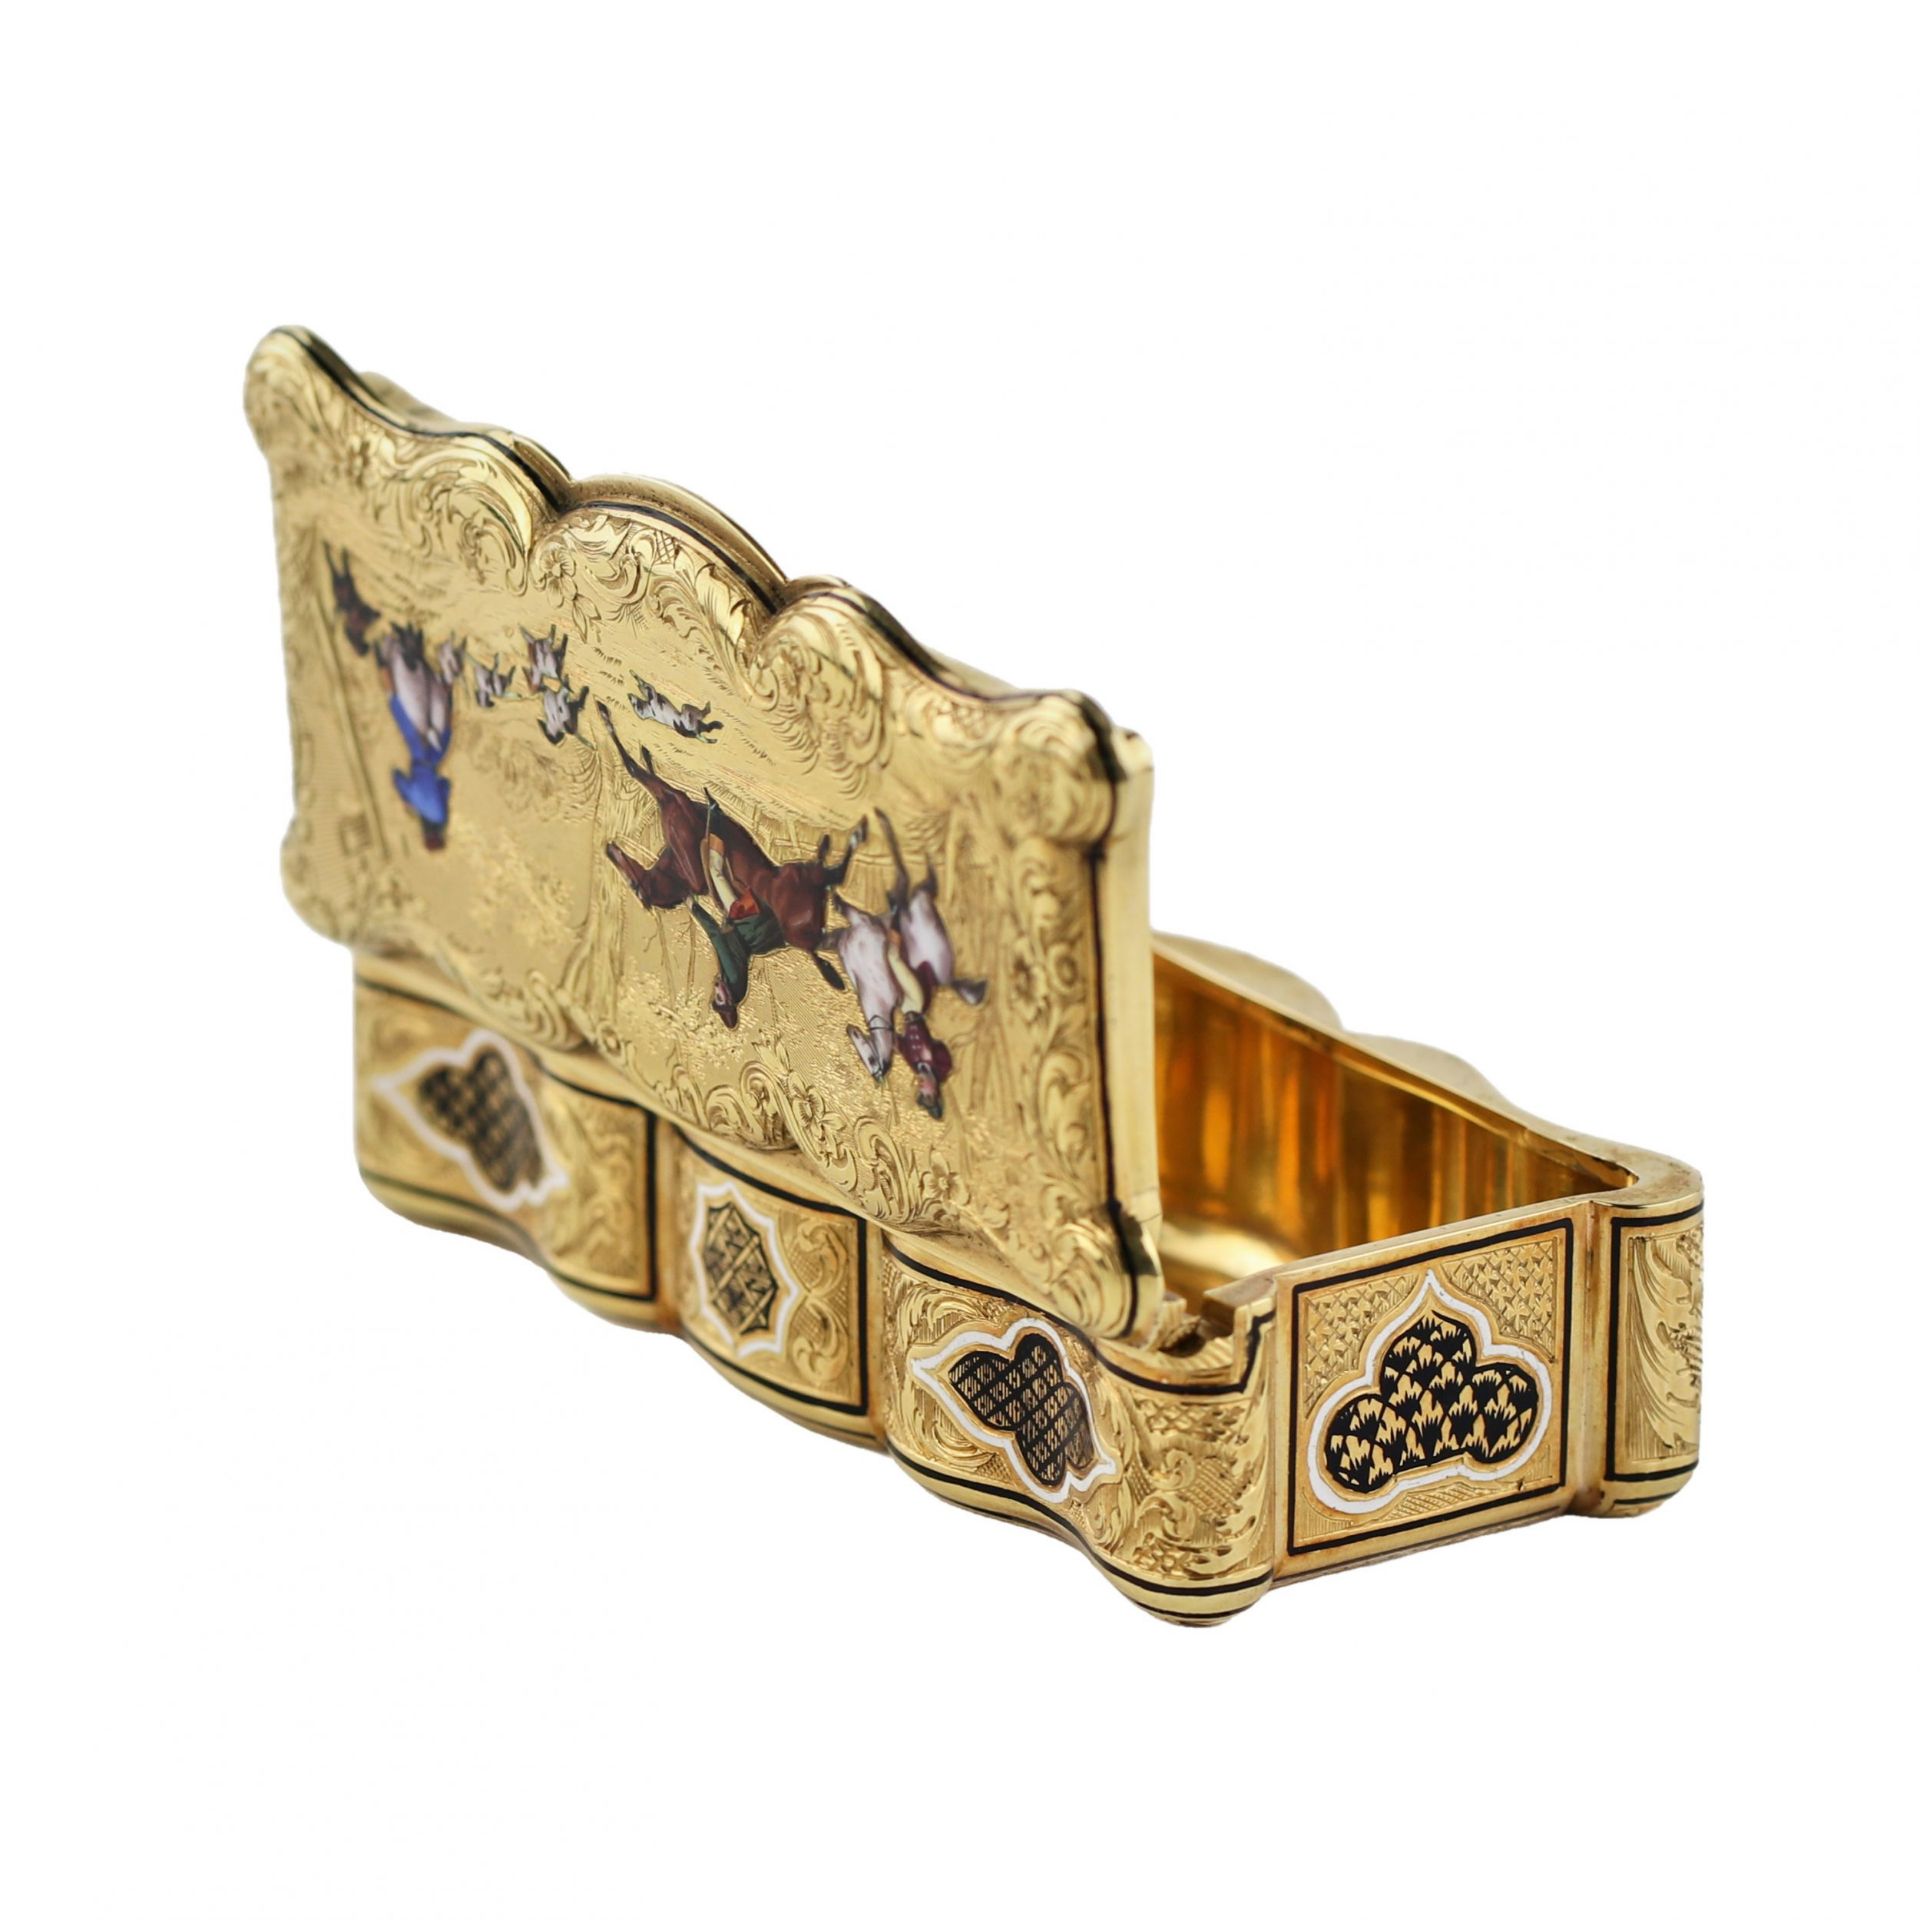 18K gold enameled snuffbox with scenes of equestrian hunting. French work of the 19th century. - Image 8 of 10